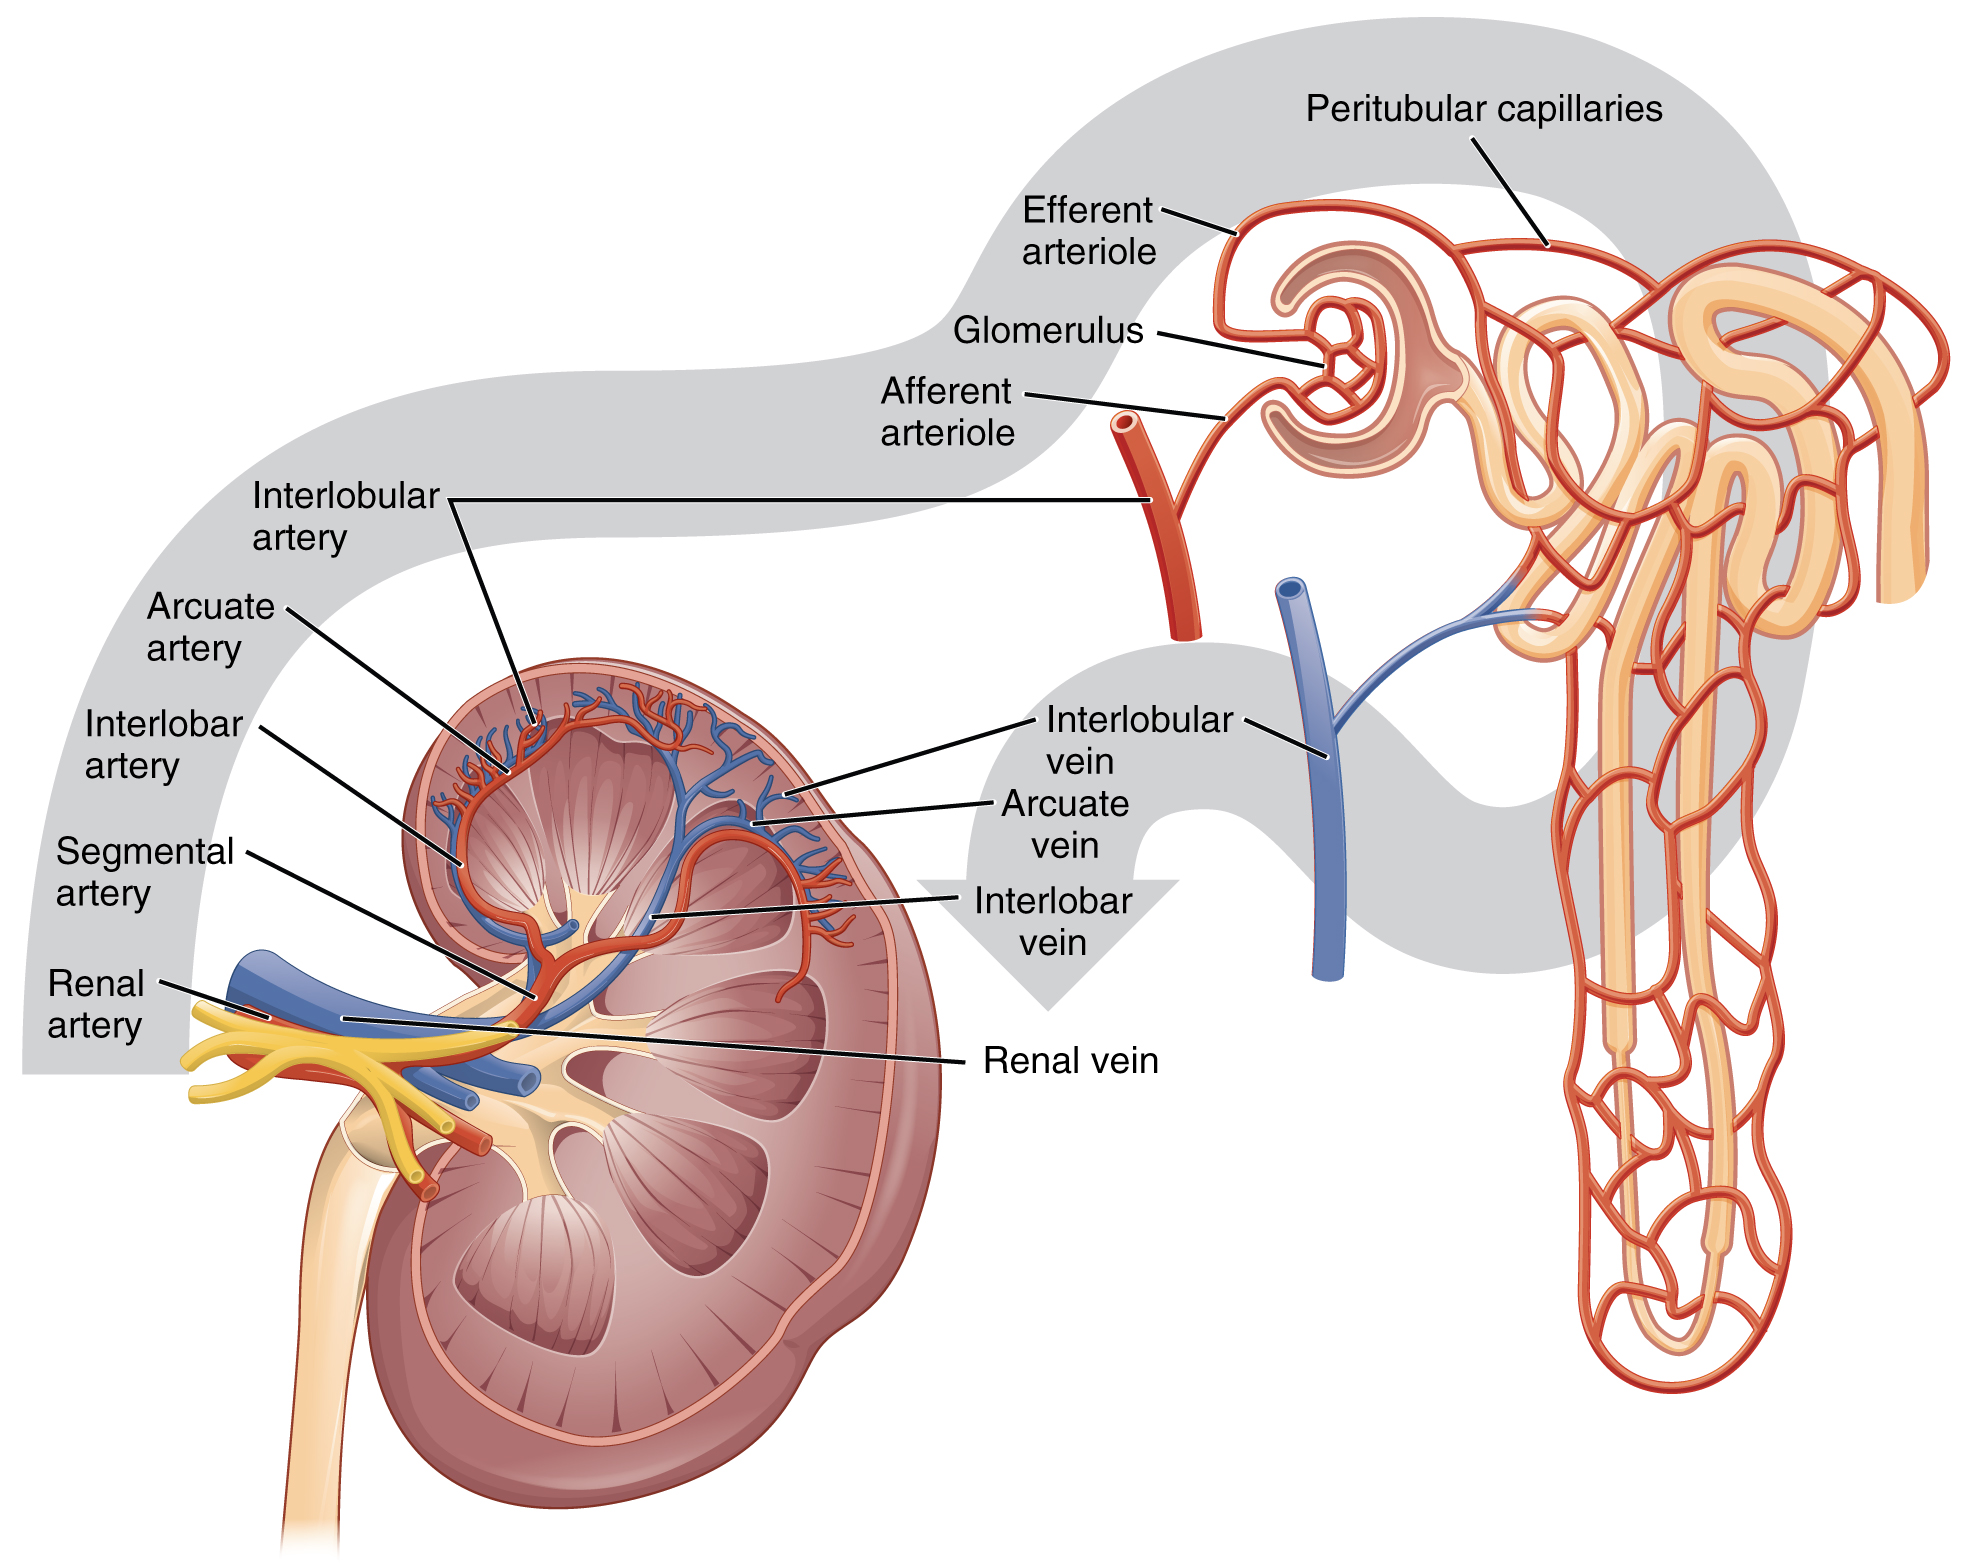 Drawing tracing the blood flow through the kidney, from renal artery to renal vein.